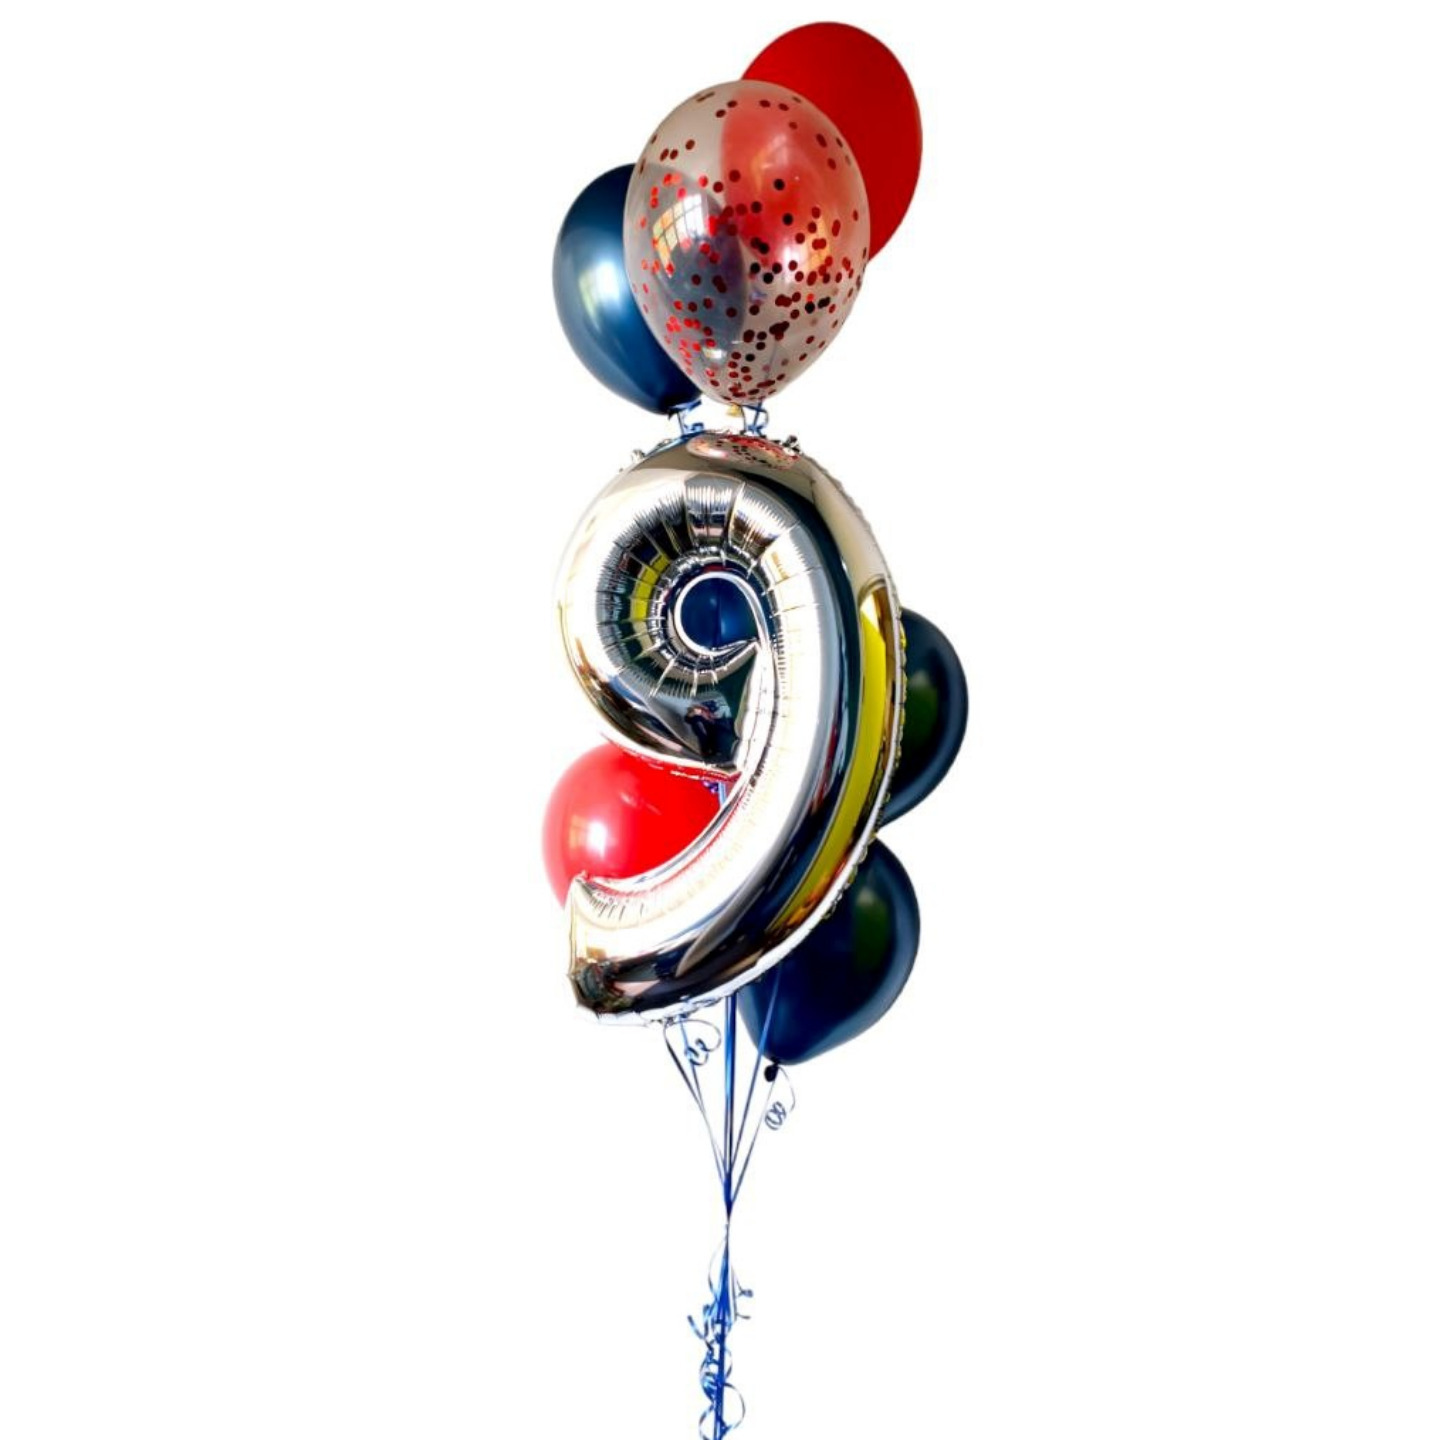 32" SINGLE NUMBER HELIUM BALLOON - BLUE & RED